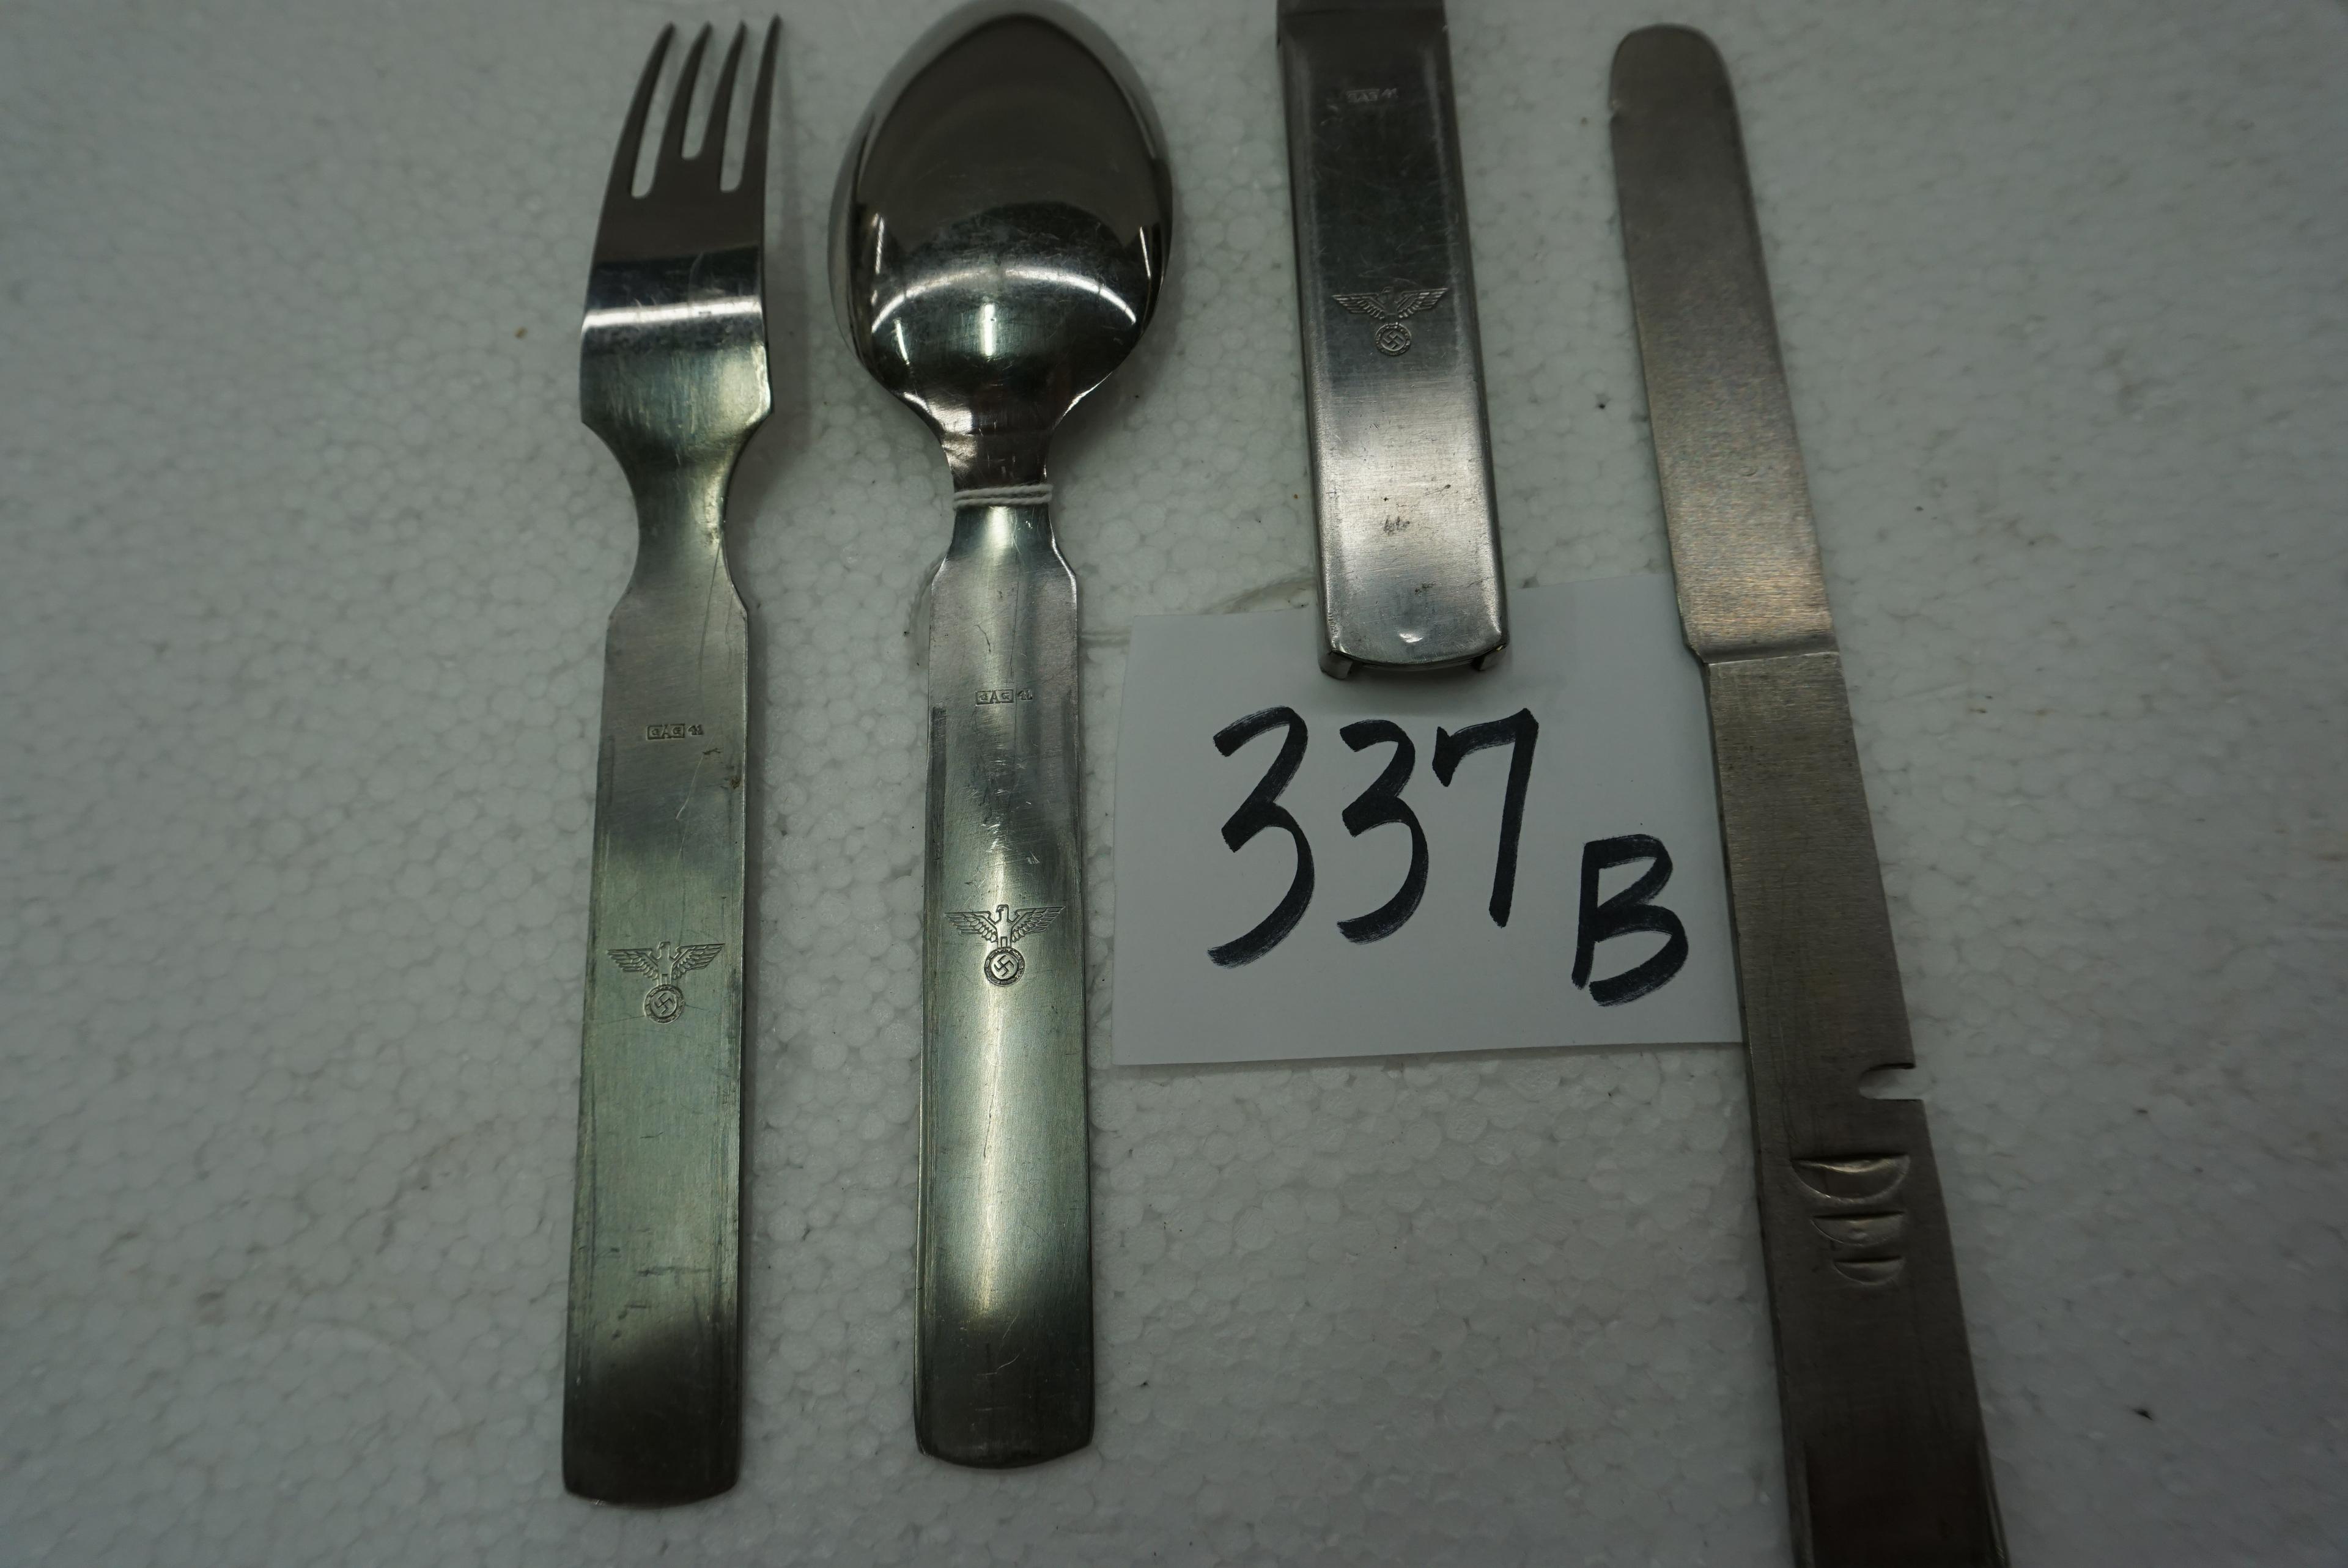 German Officer's Field Utensils, Spoon, Fork and Can Opener/Holder Stamped with Swastika and Eagle.